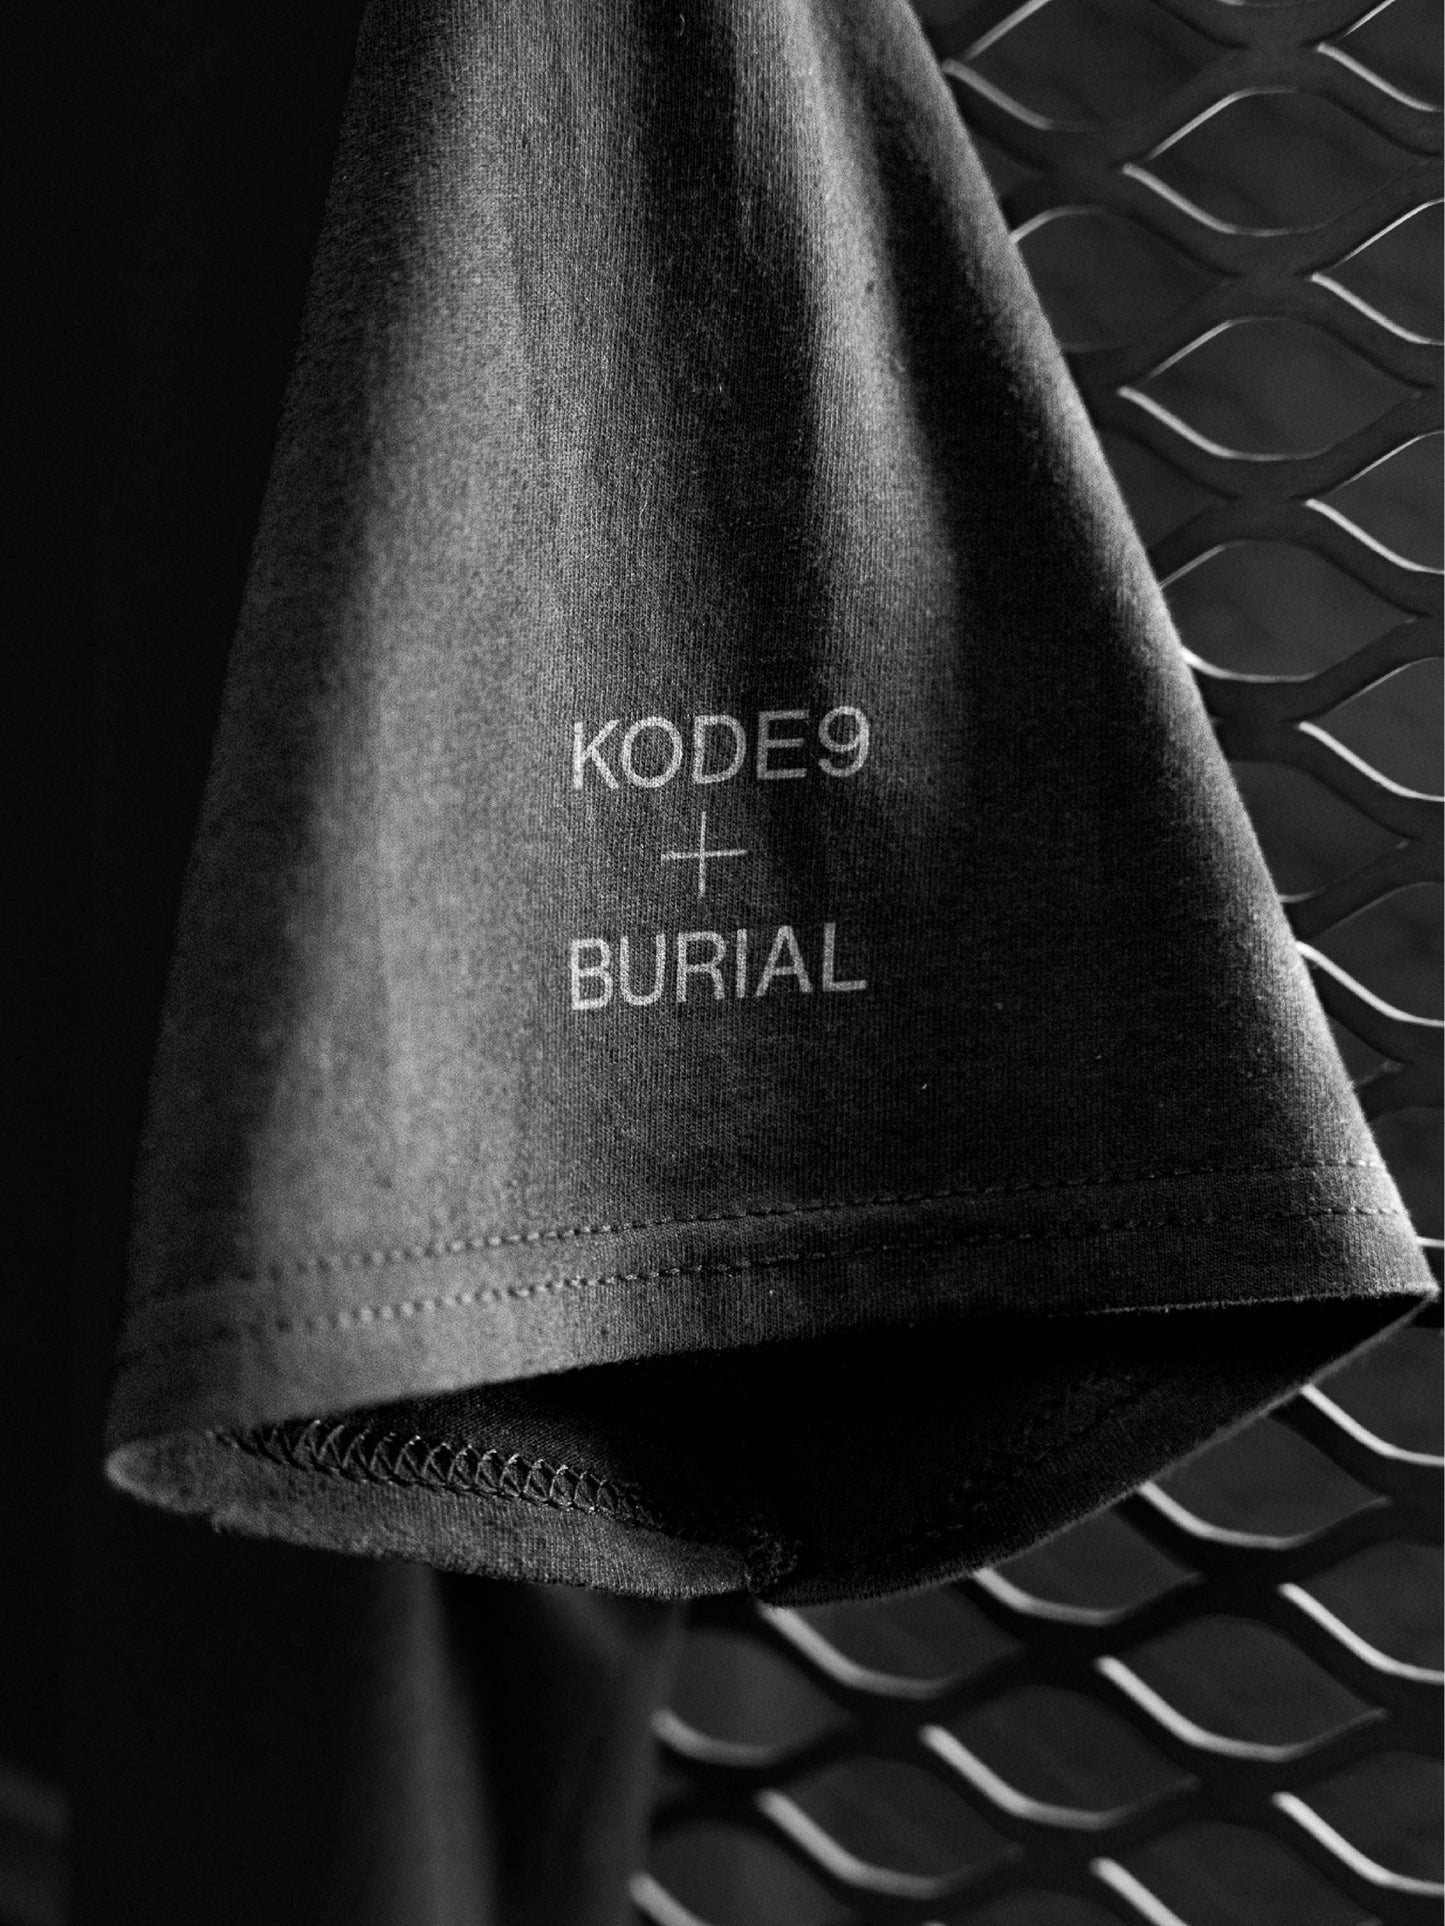 Kode9 - Infirmary / Burial - Unknown Summer - T-Shirt